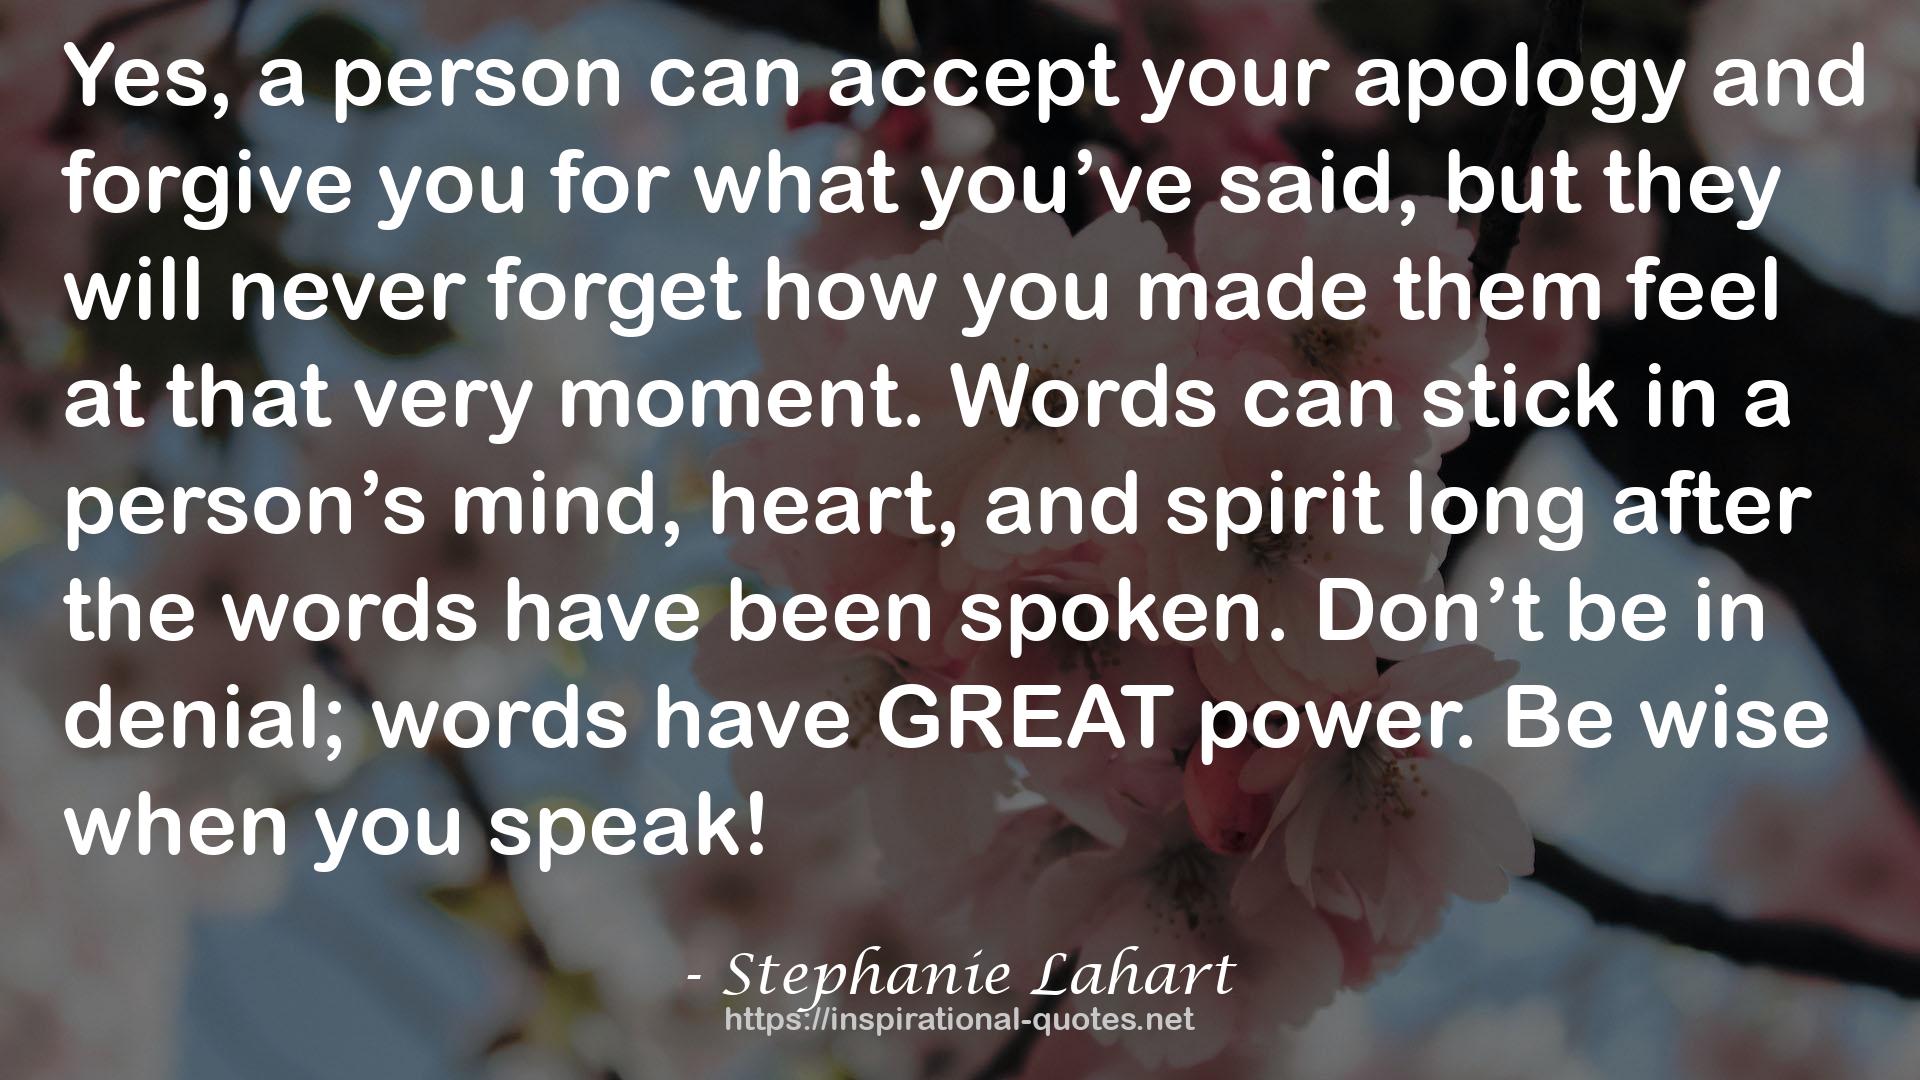 Stephanie Lahart quote : Yes, a person can accept your apology and forgive you for what you’ve said, but they will never forget how you made them feel at that very moment. Words can stick in a person’s mind, heart, and spirit long after the words have been spoken. Don’t be in denial; words have GREAT power. Be wise when you speak!